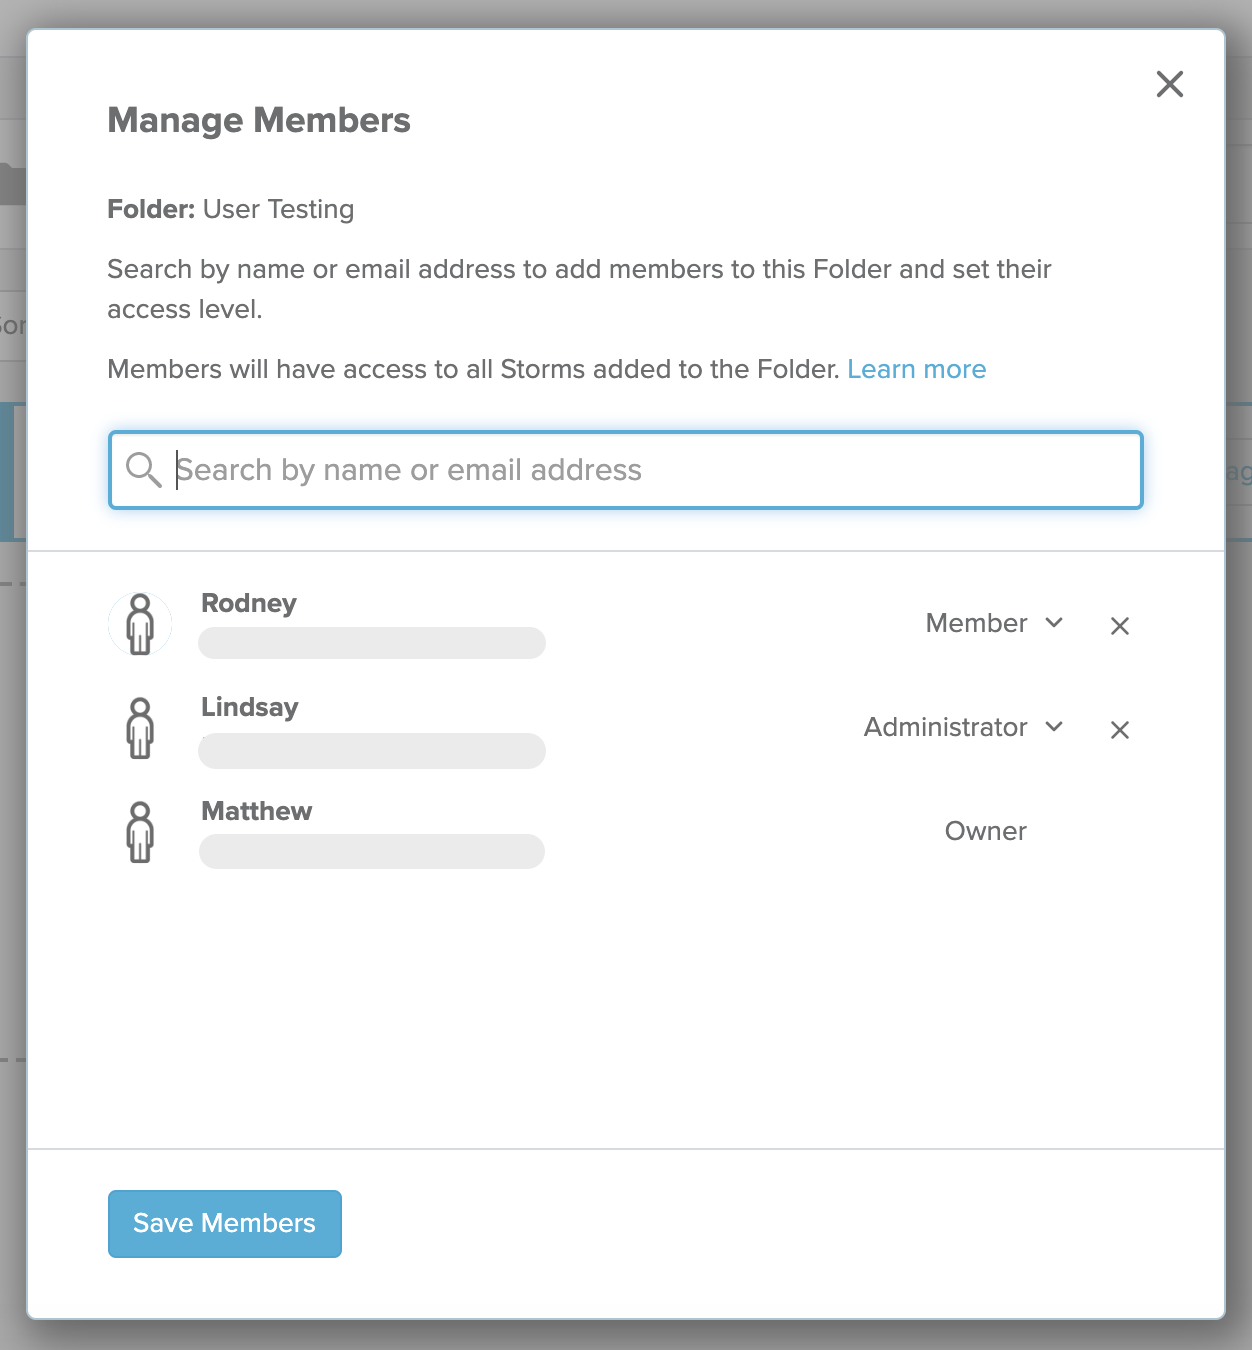 How to manage folder members in Stormboard